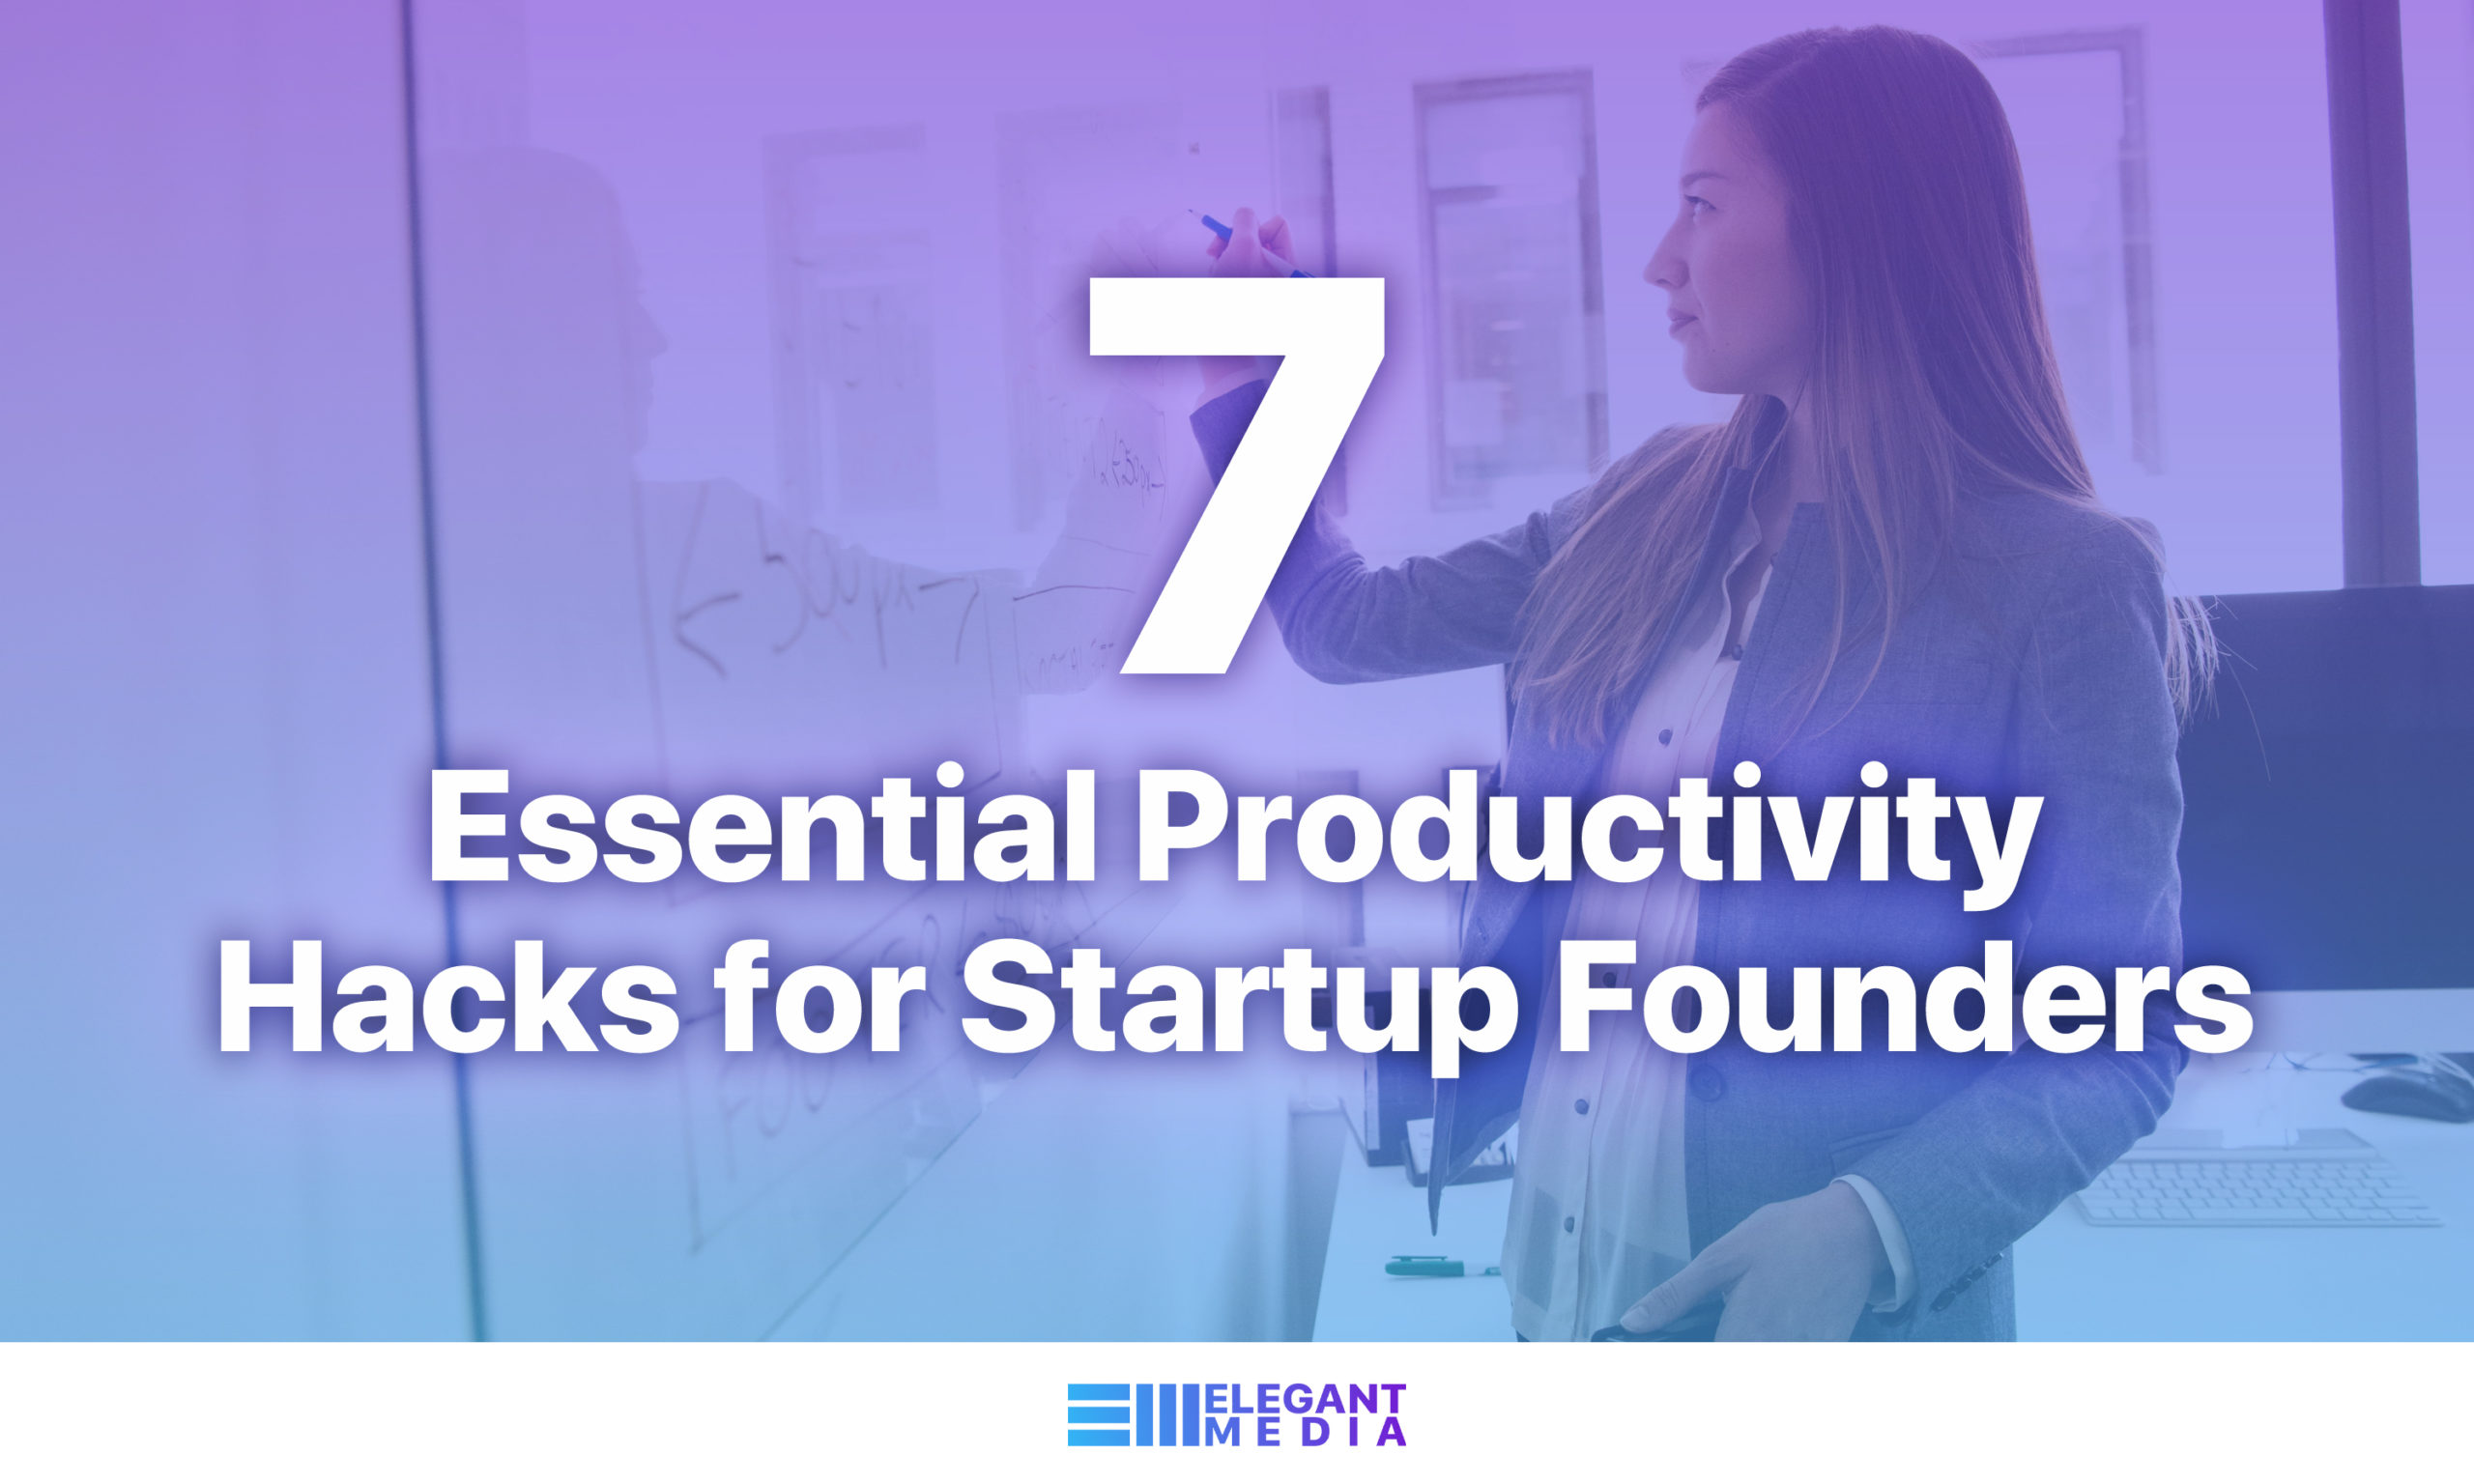 7 Essential Productivity Hacks for Startup Founders